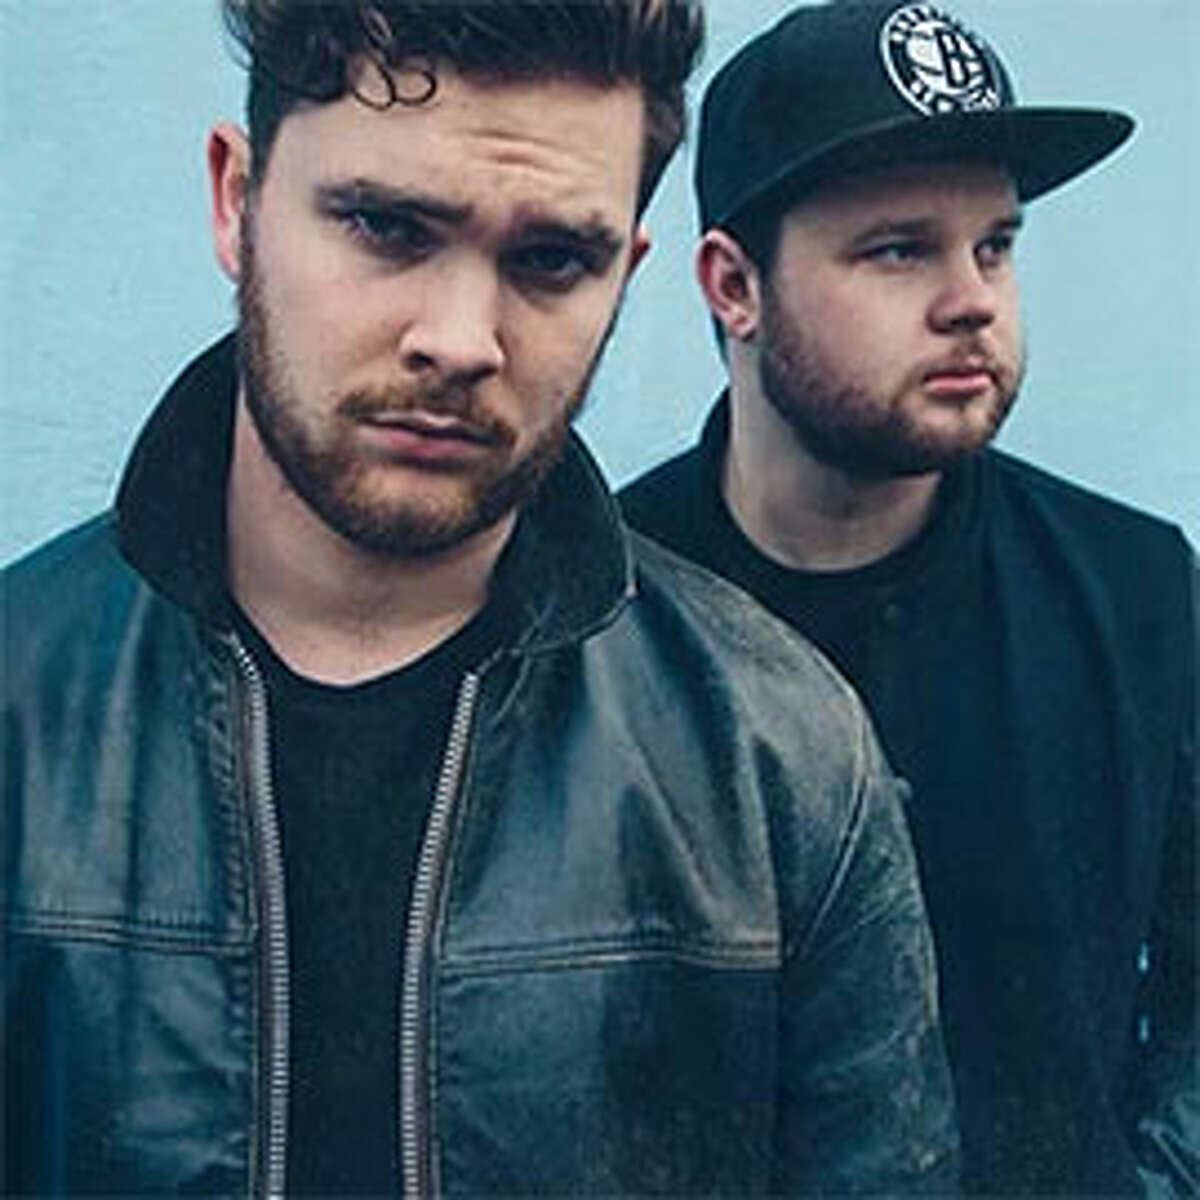 Royal Blood. British rock duo. When: Friday, July 17, 7 p.m. Where: Upstate Concert Hall, 1208 Rte. 146 Clifton Park. For more info and tickets, click here.